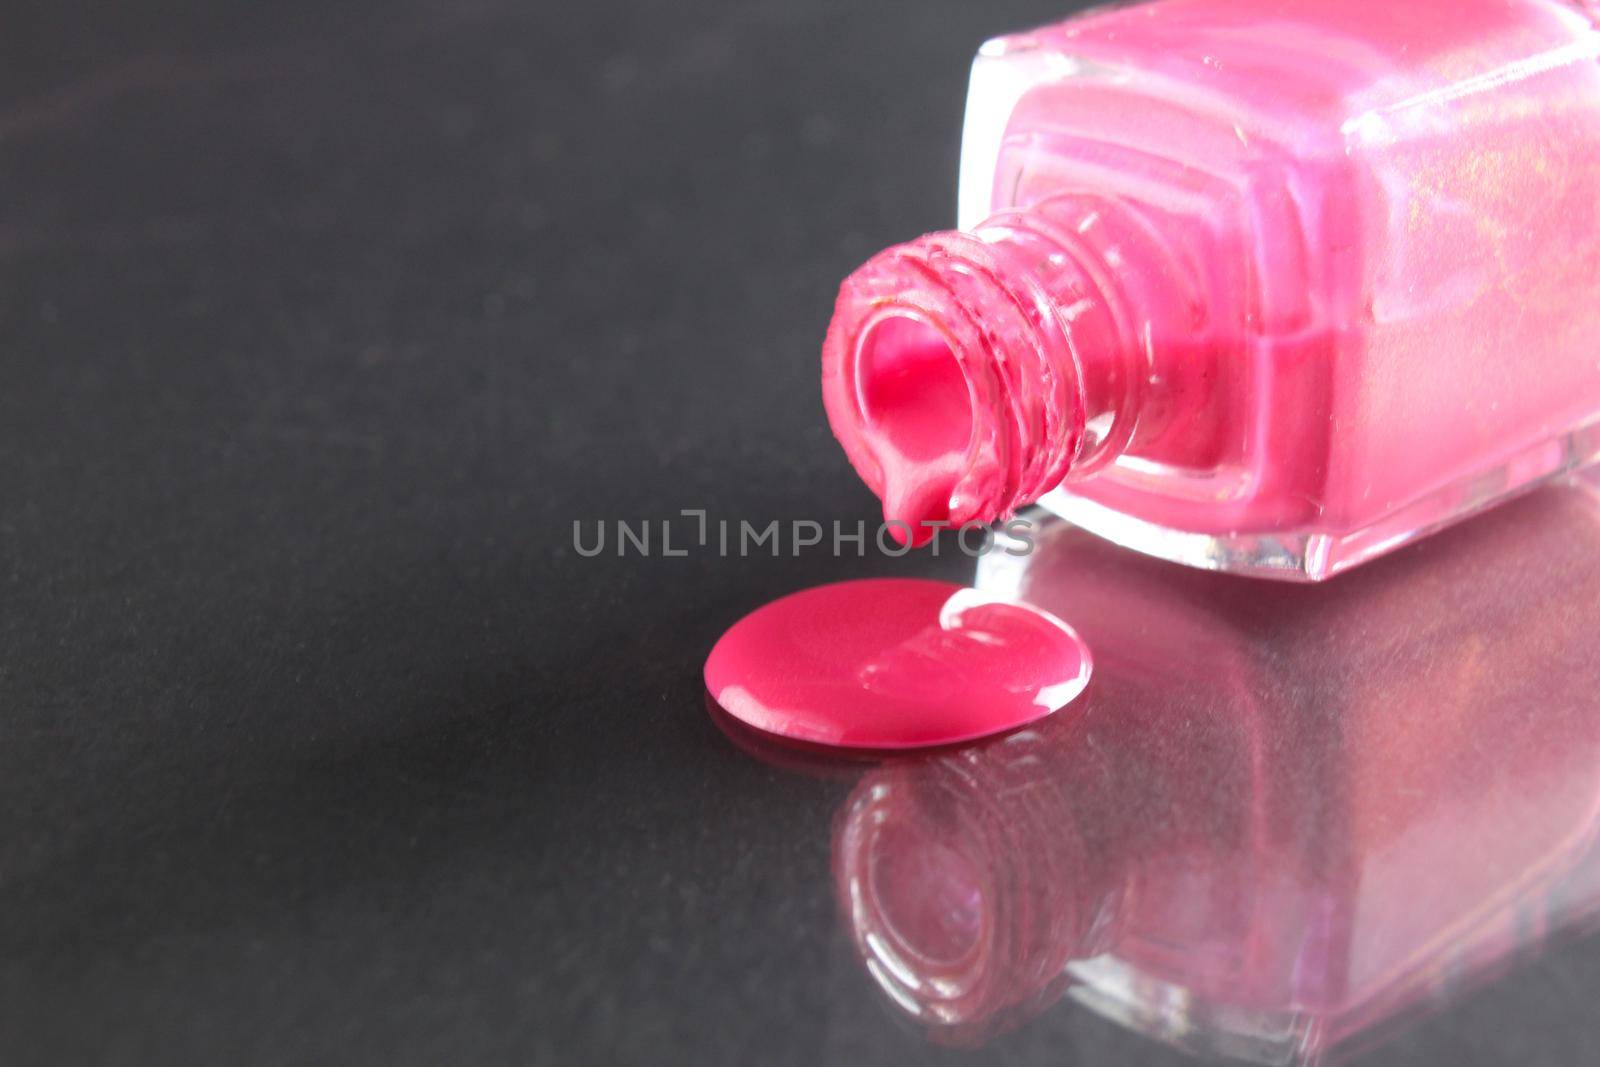 Pink nail polish is poured out of the bottle bottle on a black background with a copyspace place for text.